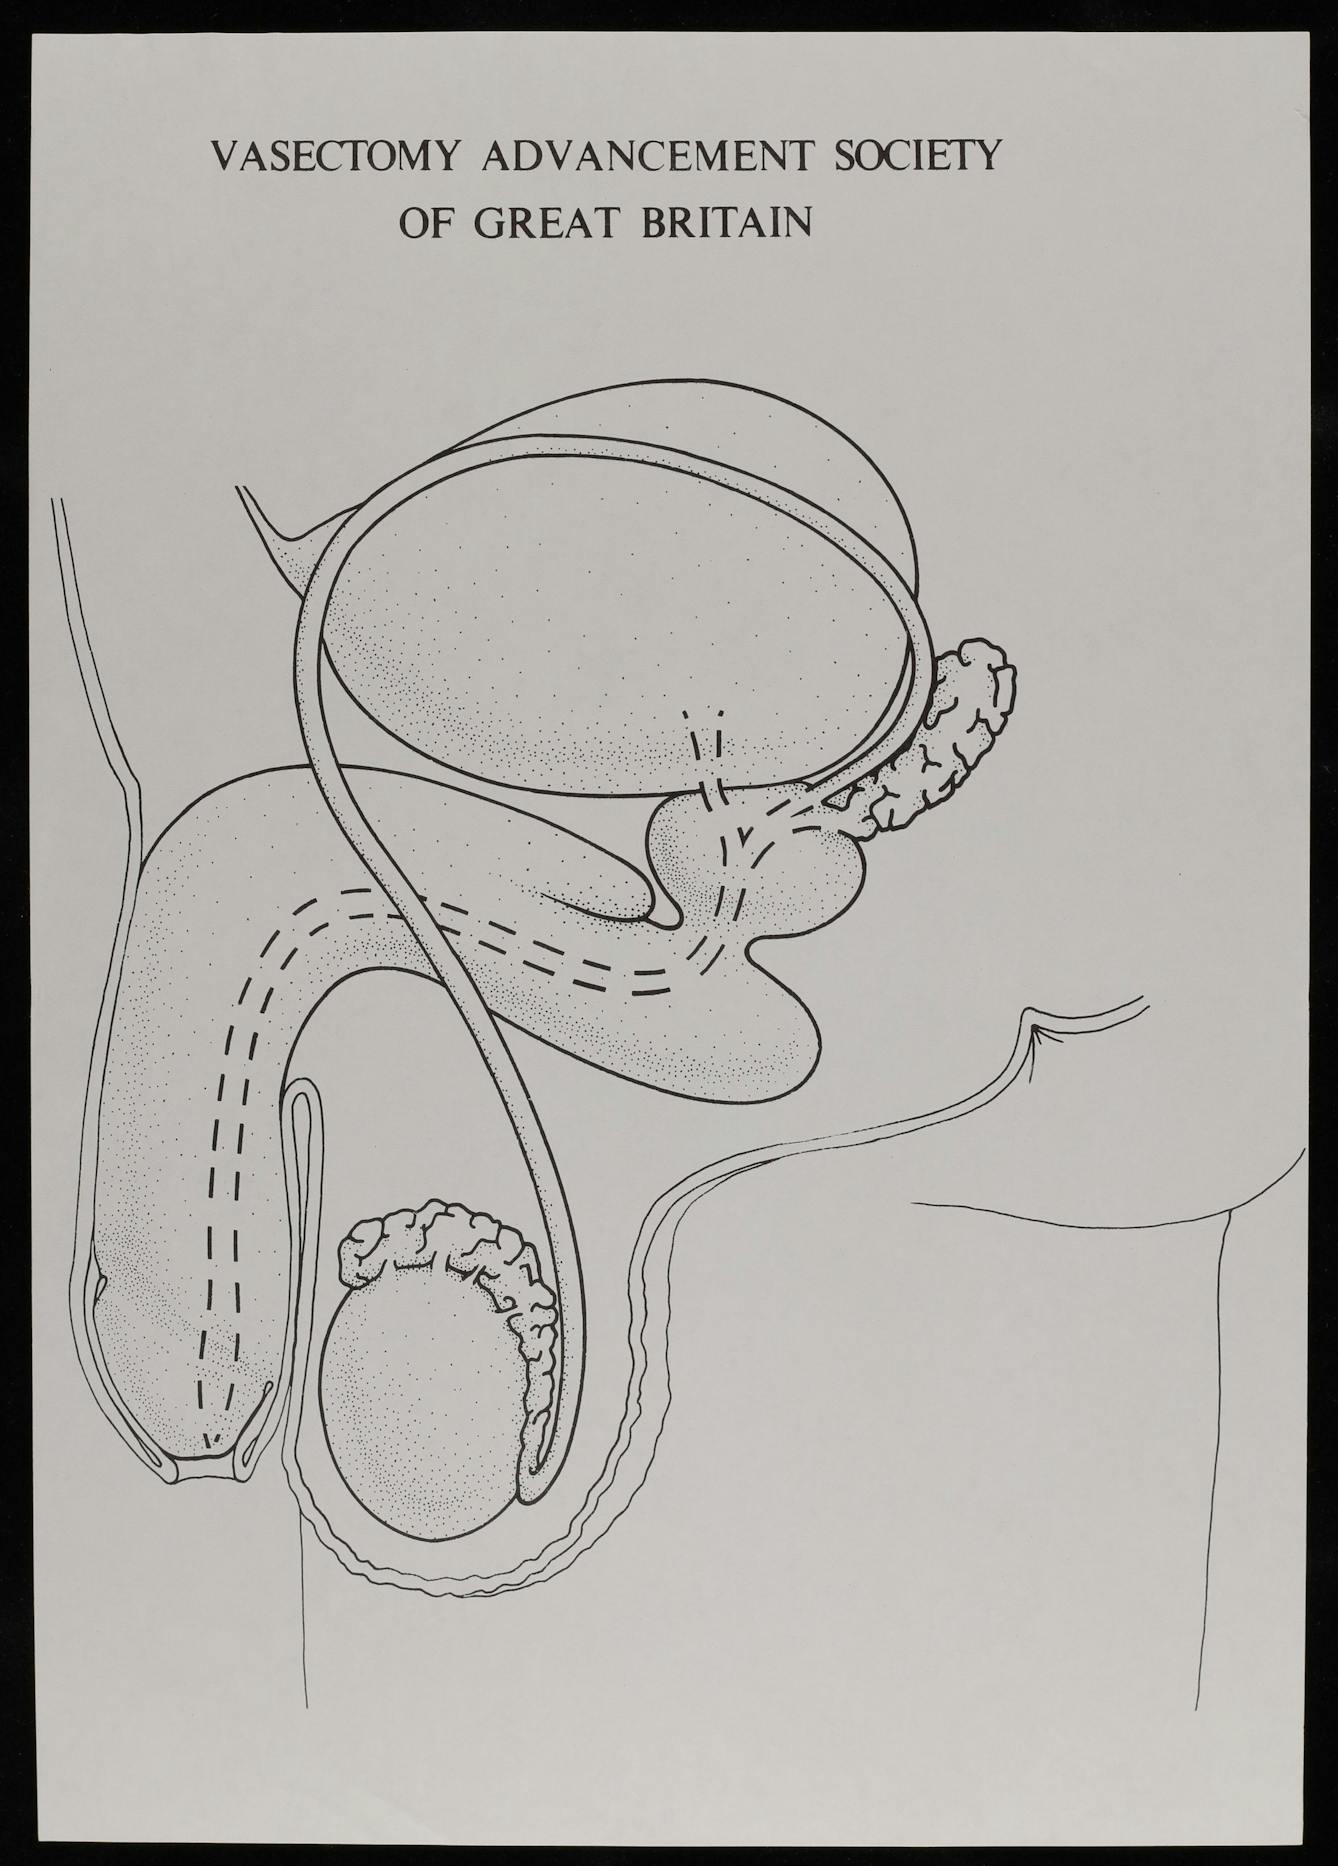 Line illustration of a vasectomy, titled "Vasectomy Advancement Society of Great Britain", 1972-1973